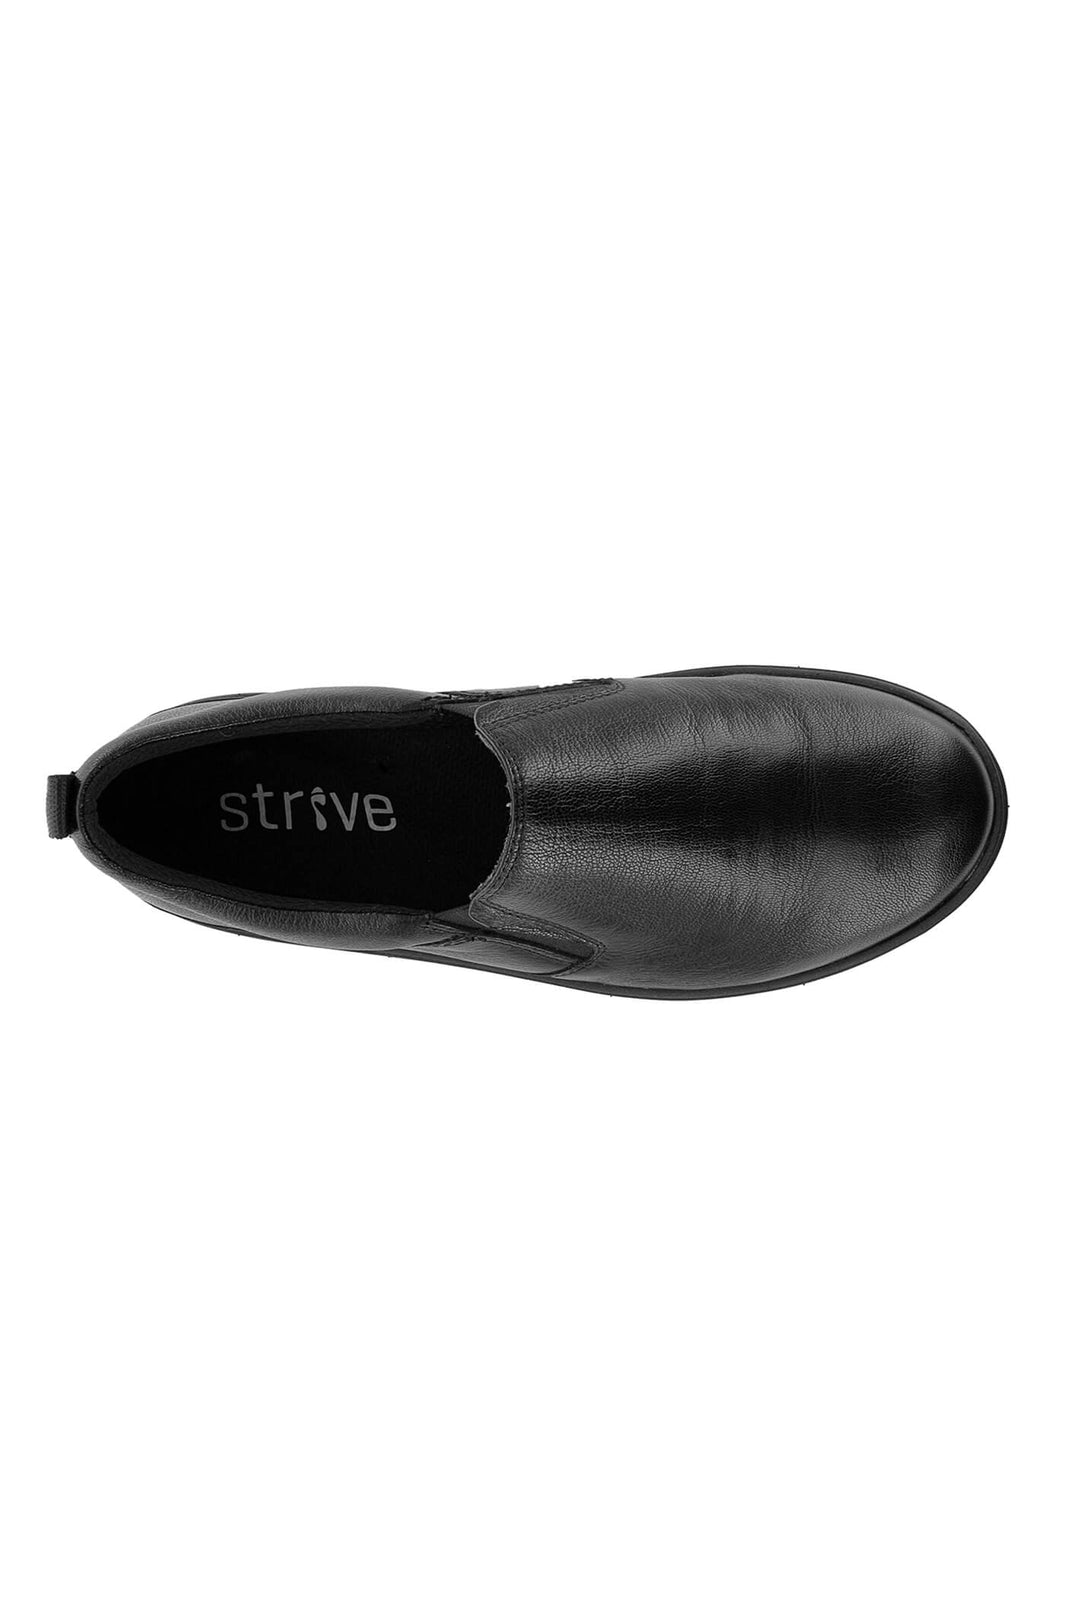 Strive Florida II Black Leather Trainers - Shirley Allum Boutique